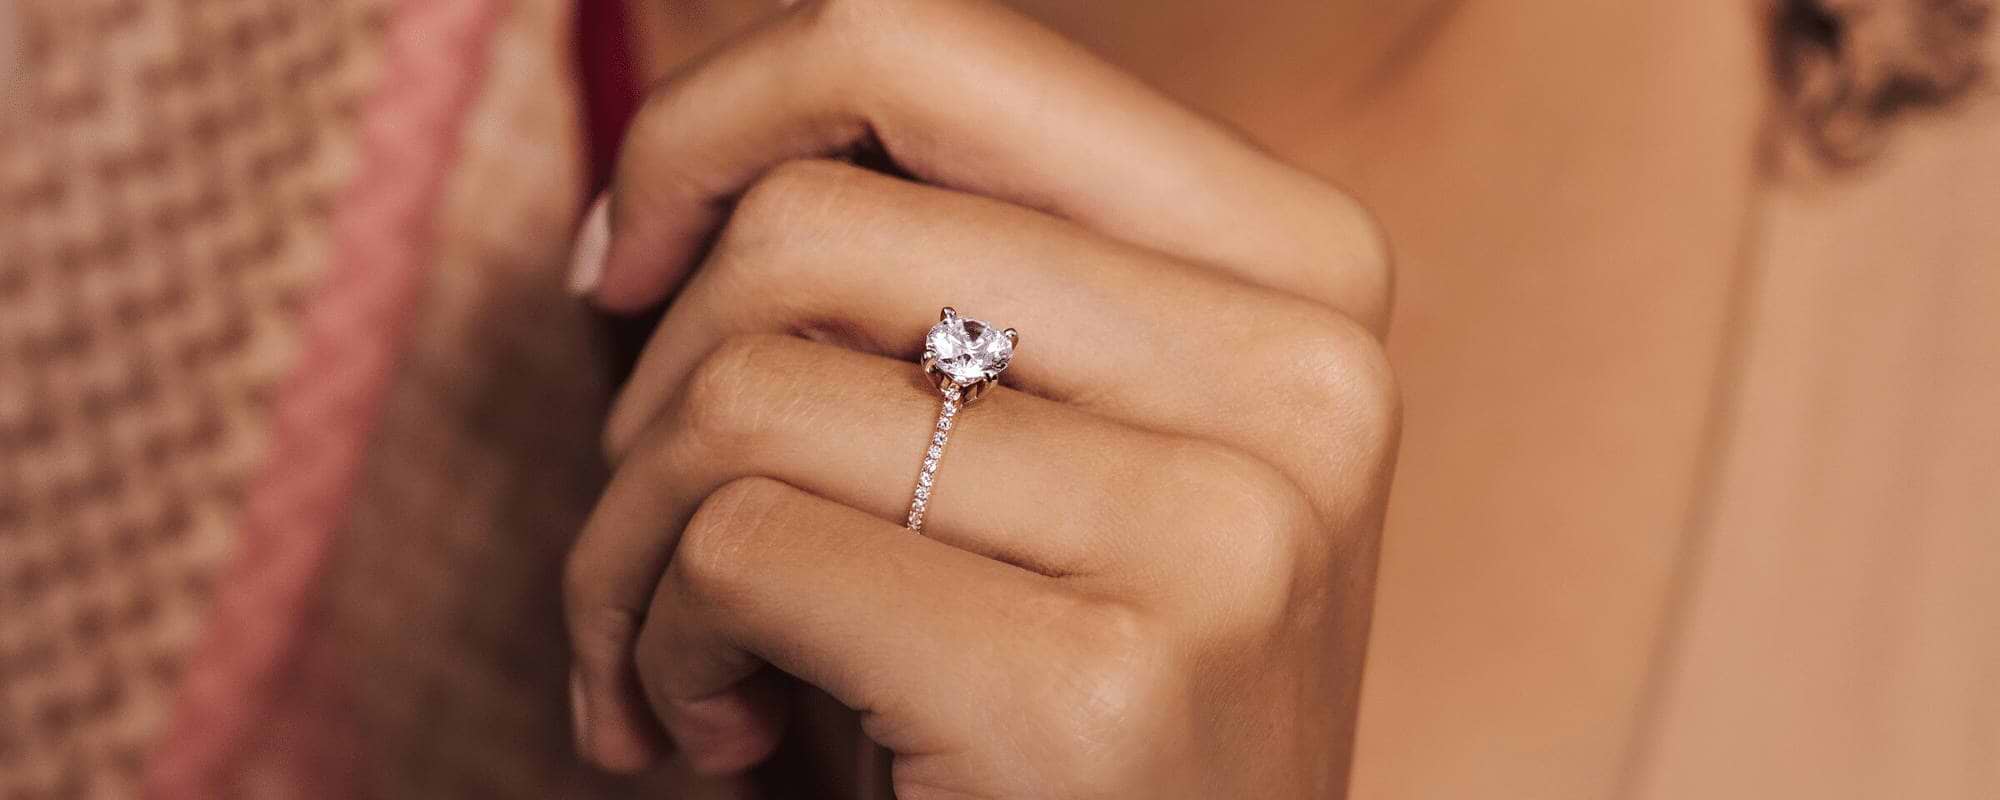 Top 8 Thin Band Engagement Rings